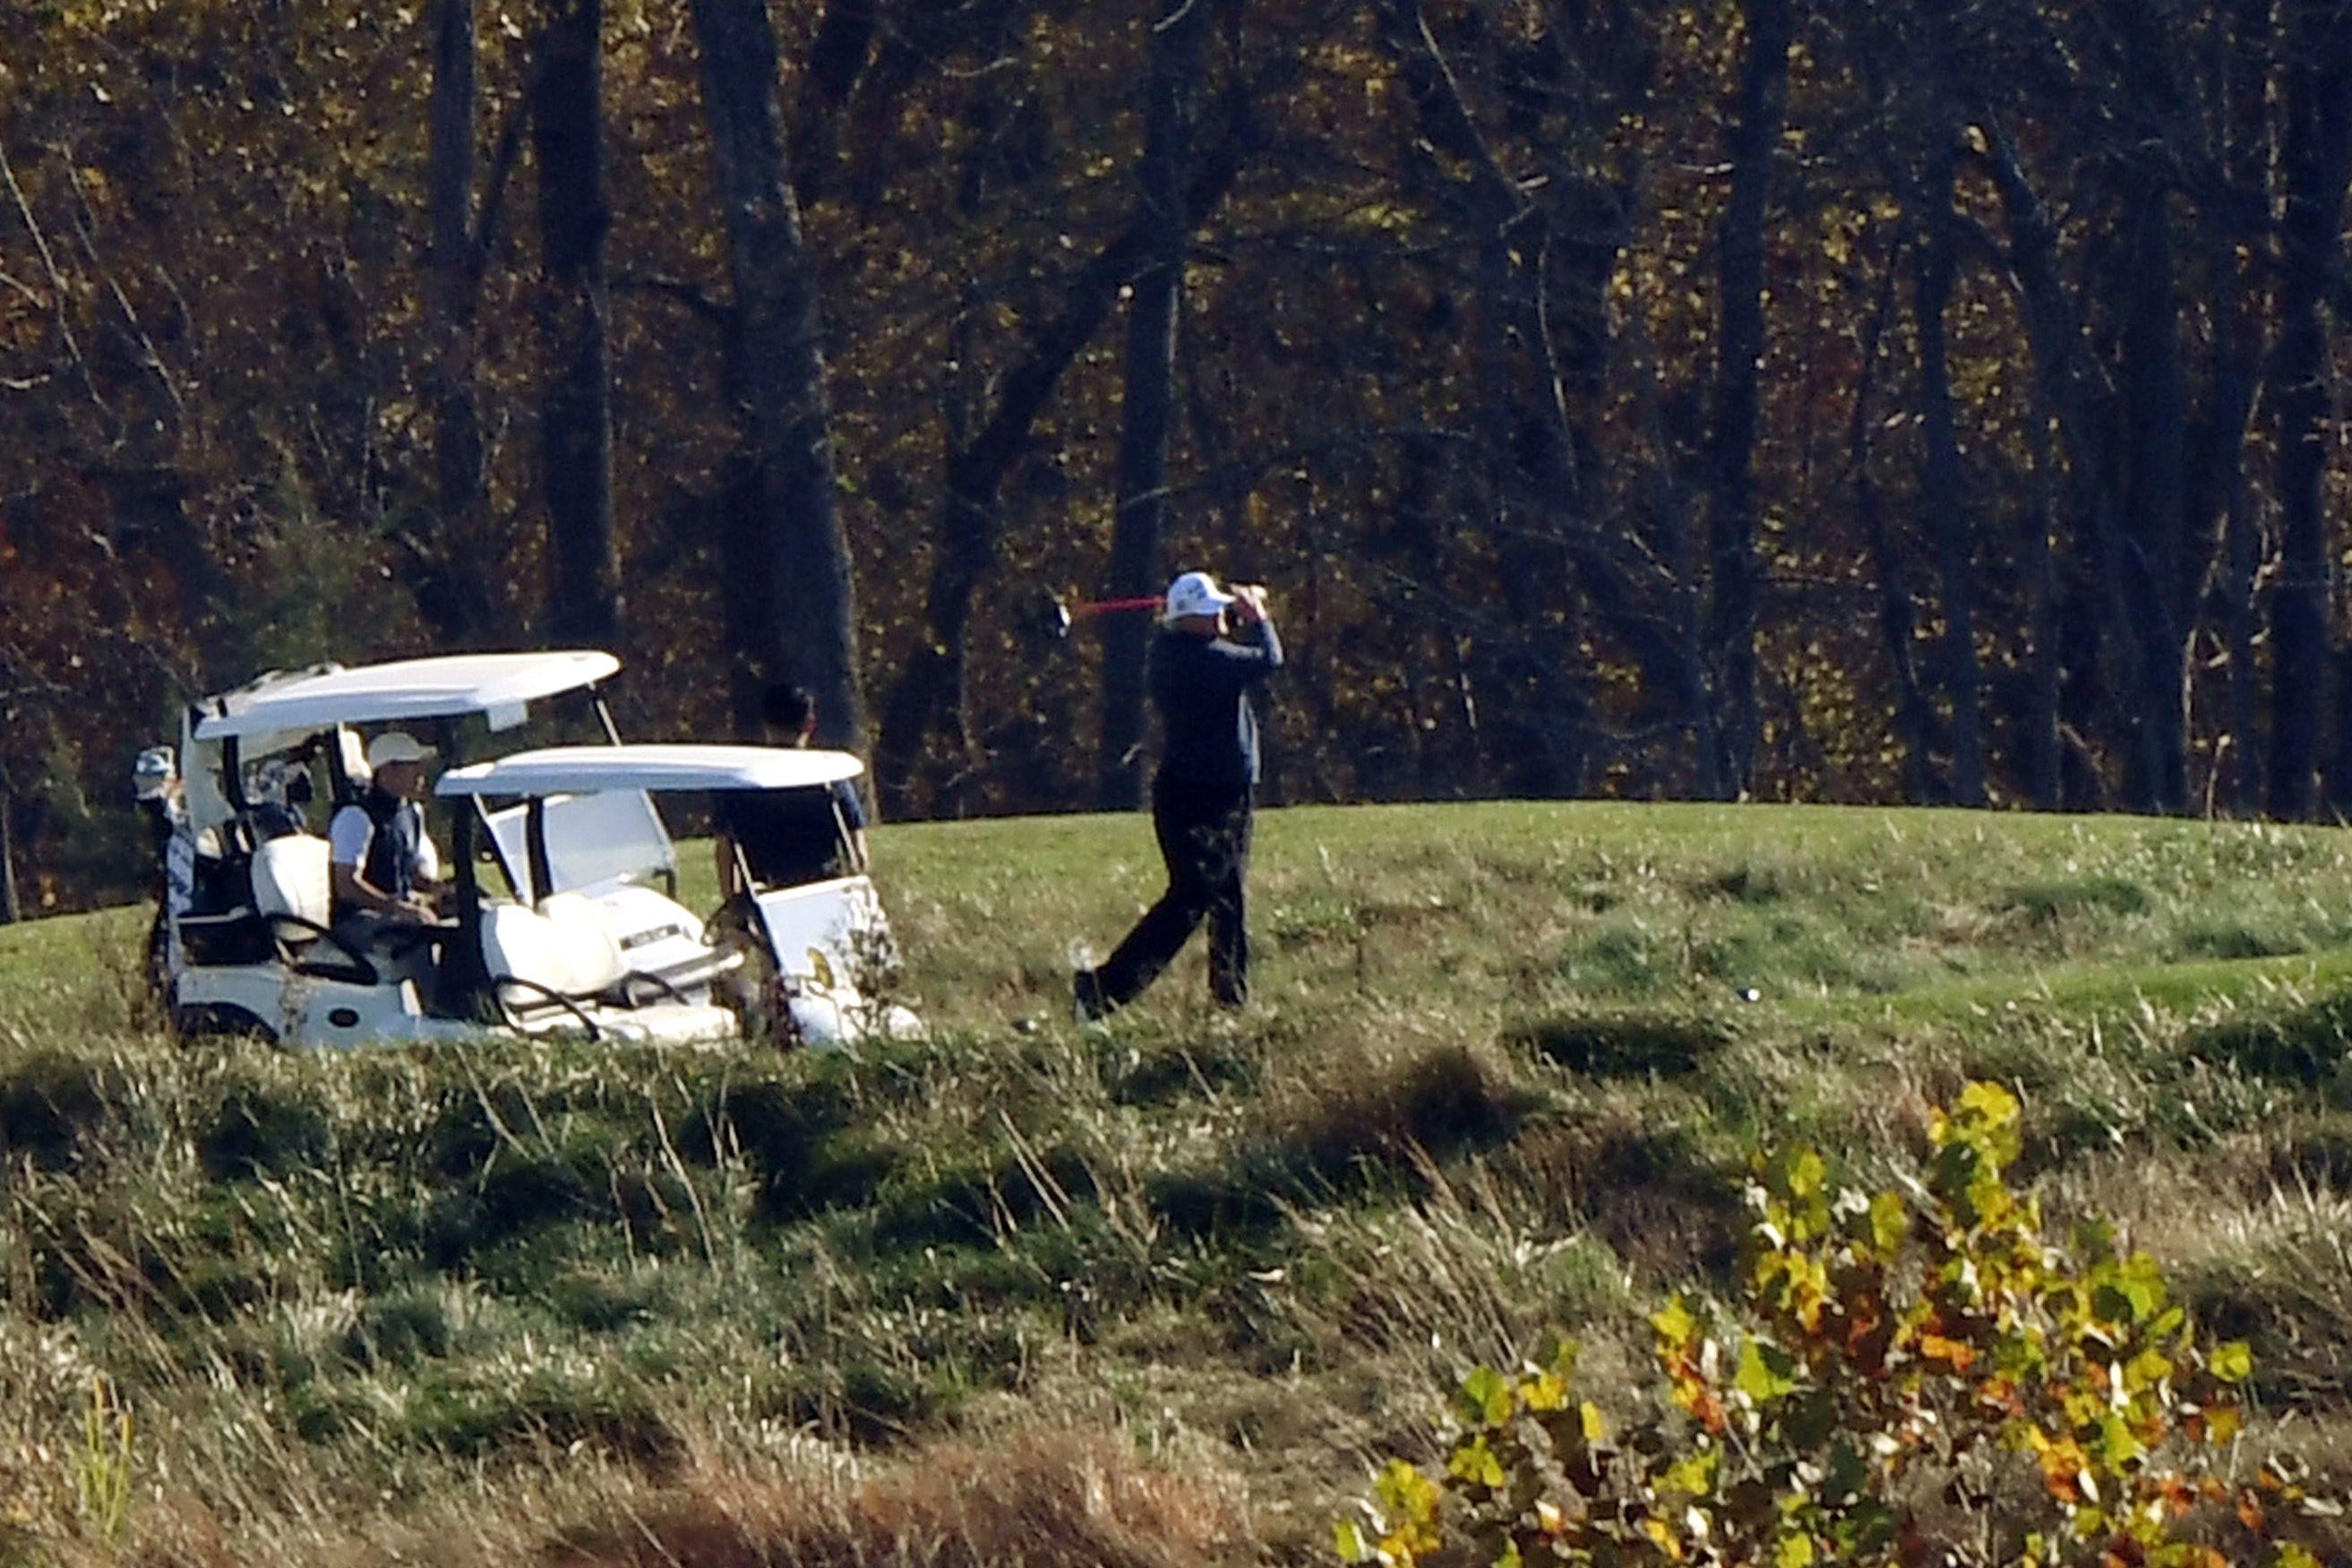 Trump plays golf while standing next to a golf cart, looking like a loser.